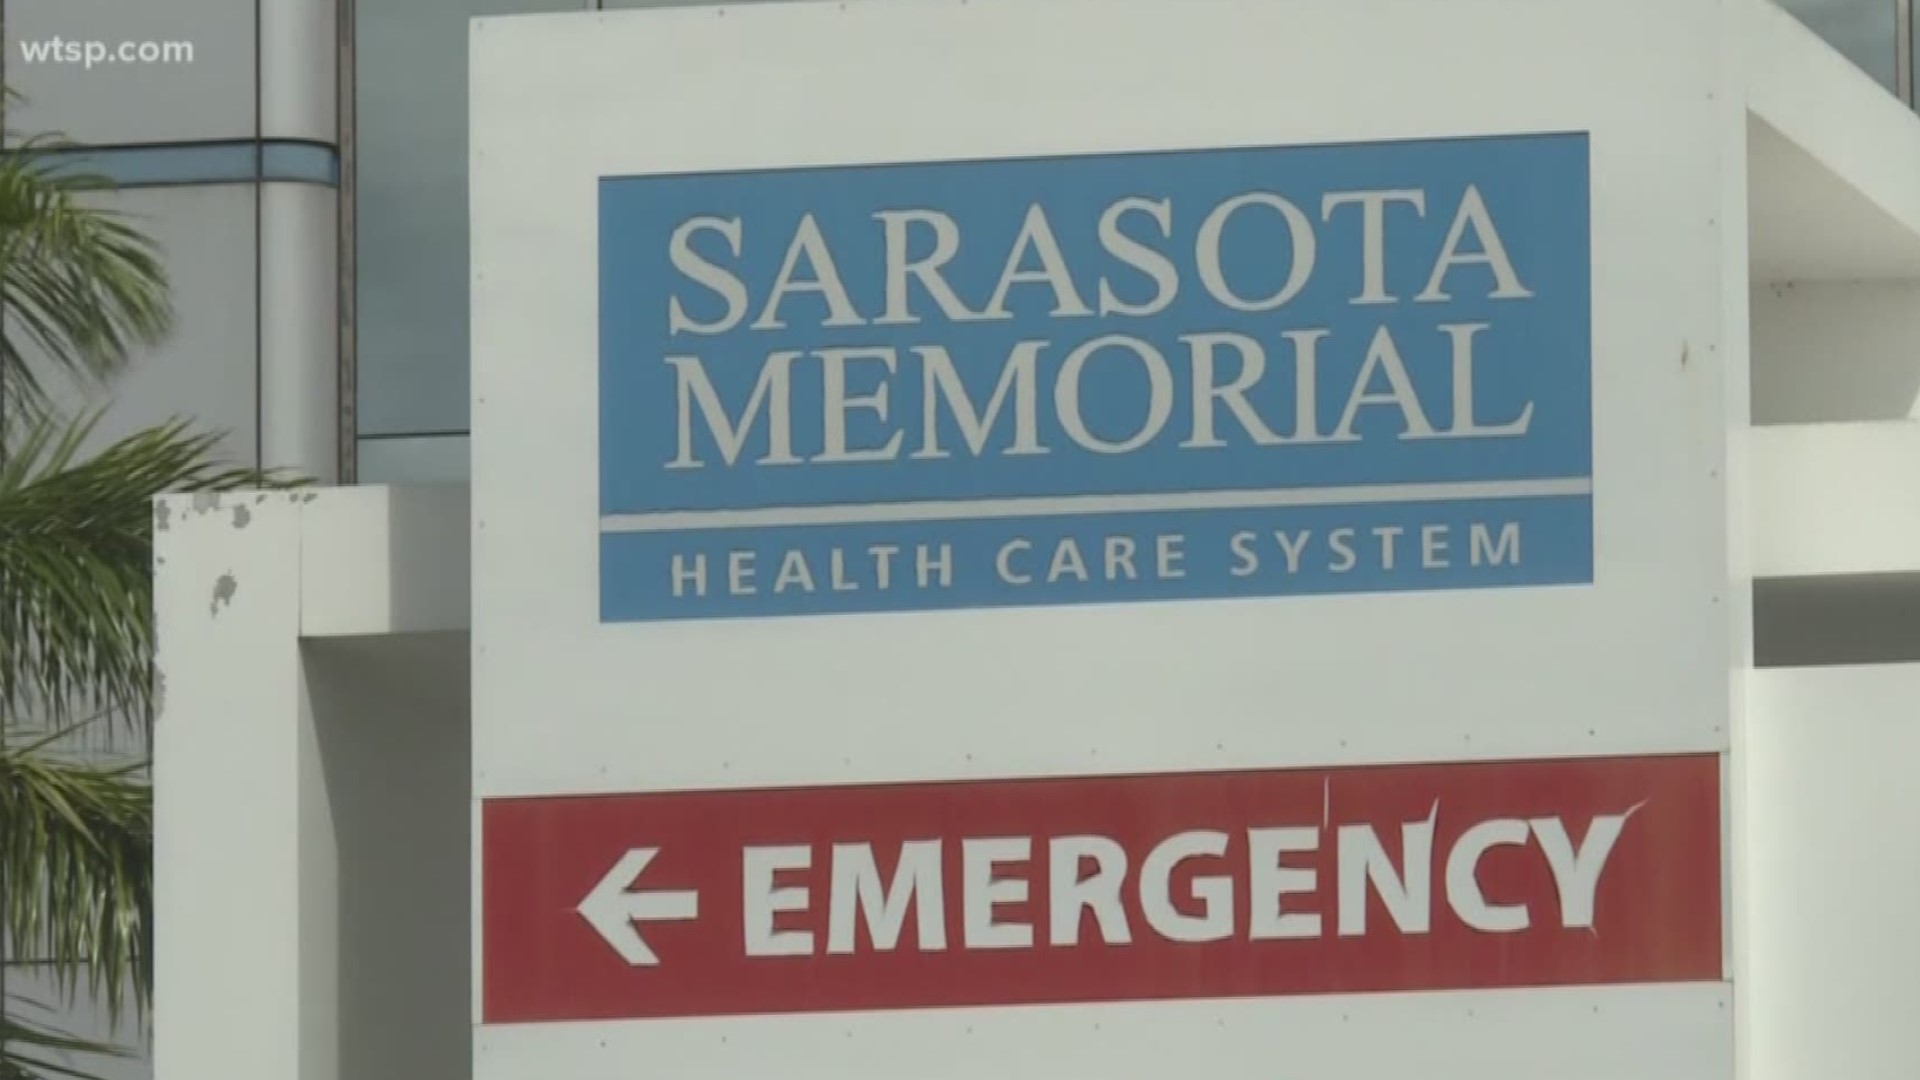 The hospital is cutting hours and furloughing certain staff, asking them to stay safe at home.